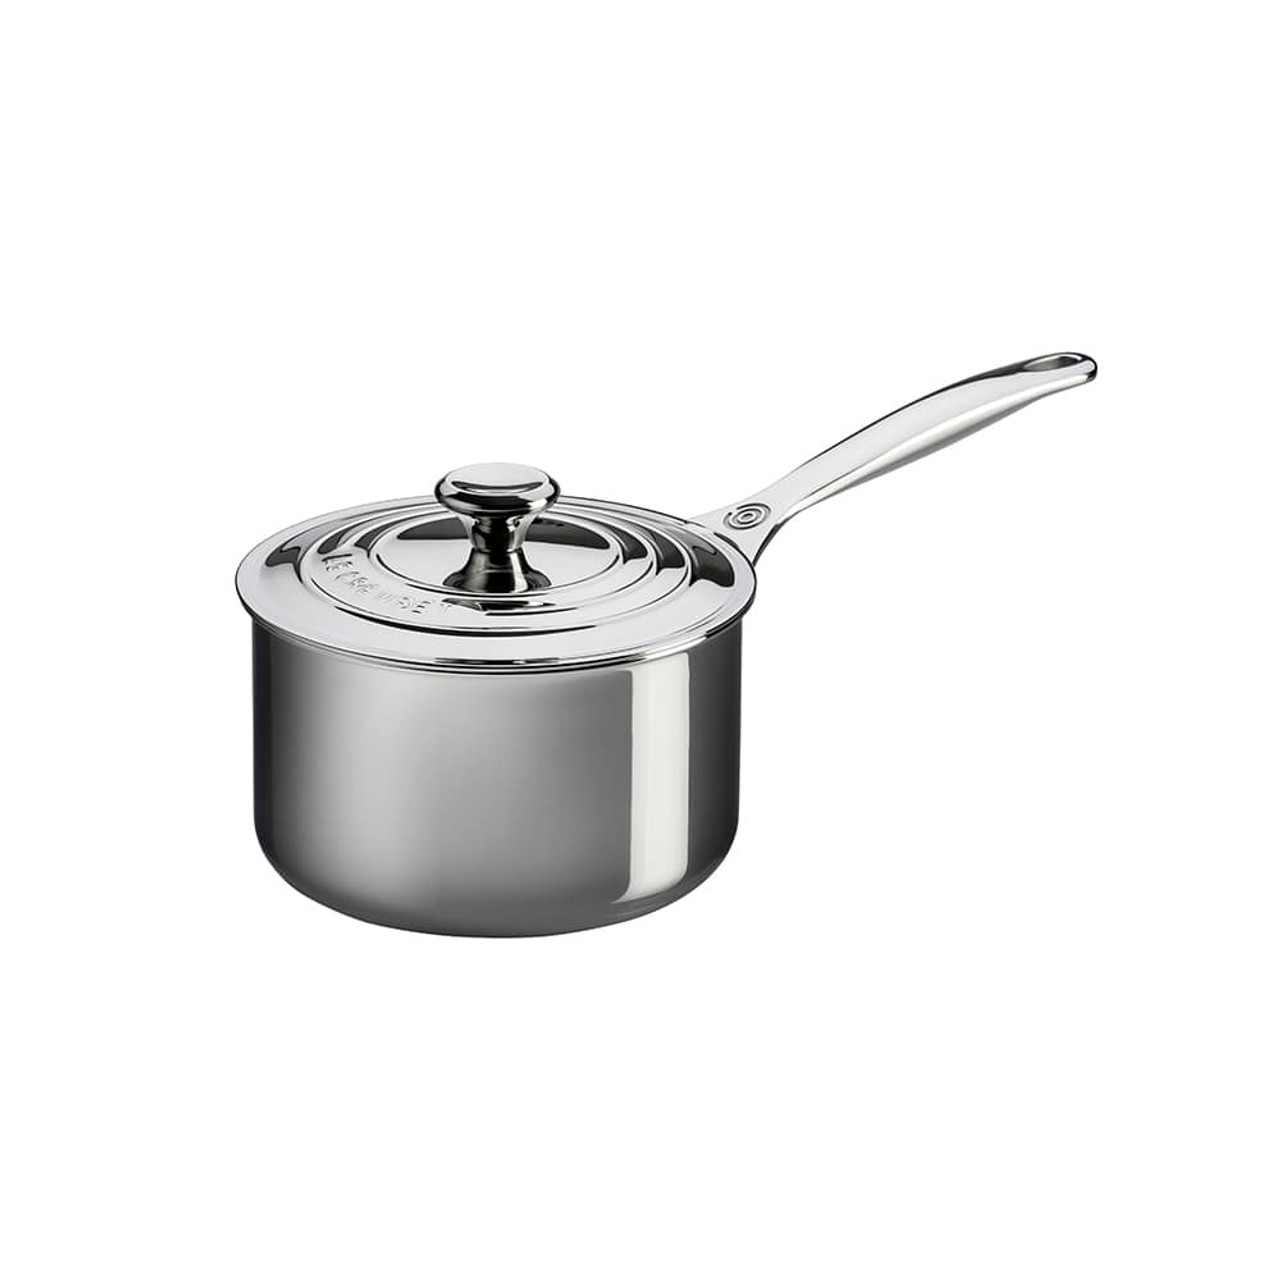 https://cdn11.bigcommerce.com/s-hccytny0od/images/stencil/1280x1280/products/861/1365/le-creuset-stainless-steel-saucepan-2qt__51343.1588355872.jpg?c=2?imbypass=on